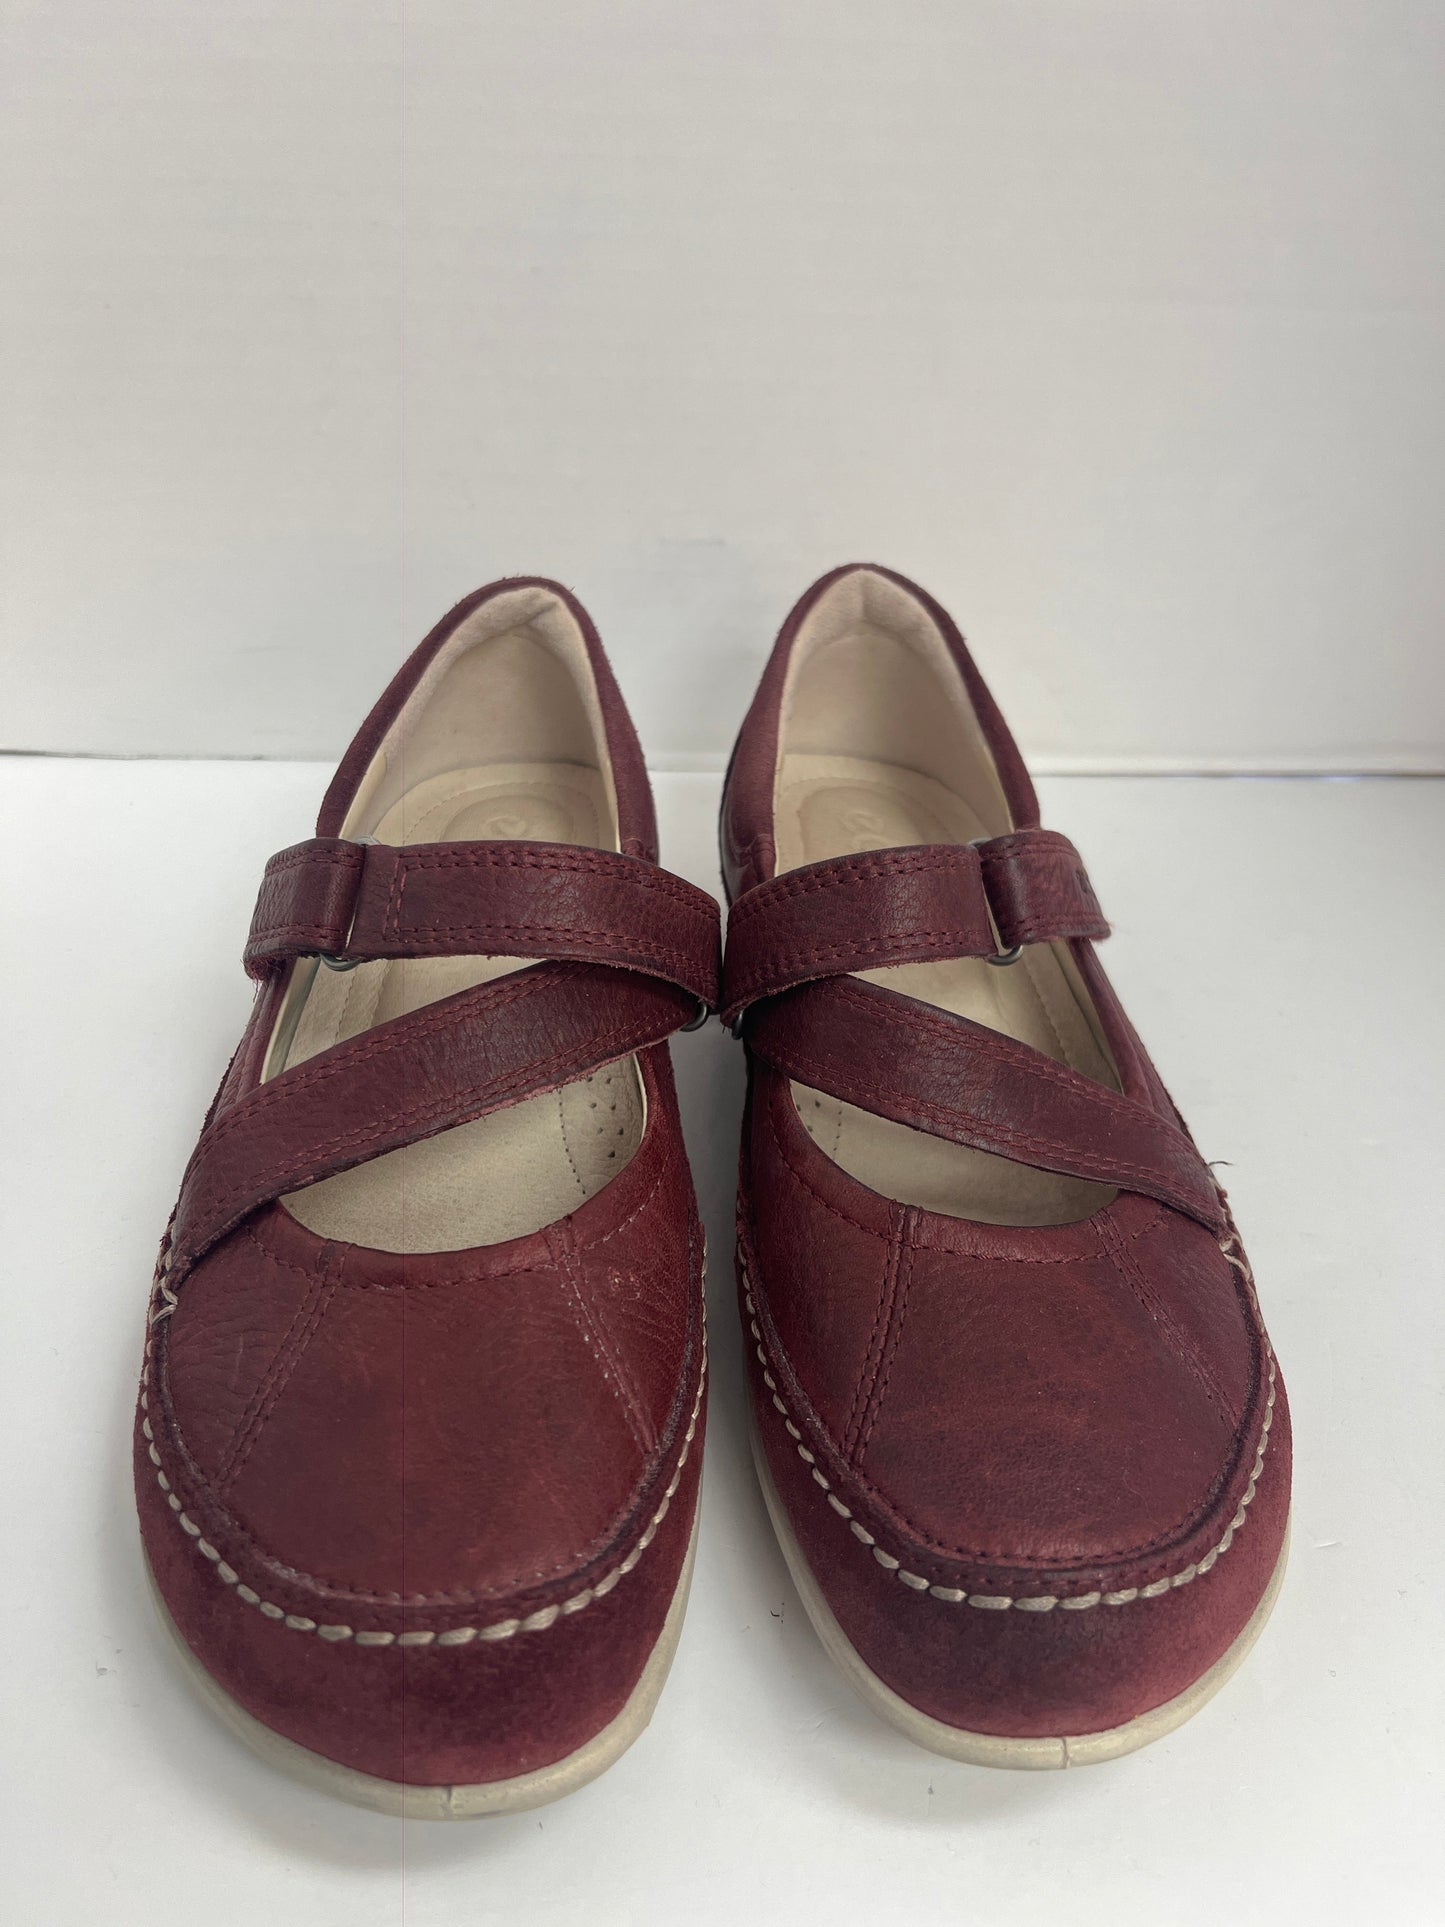 Shoes Flats Other By Ecco  Size: 5.5